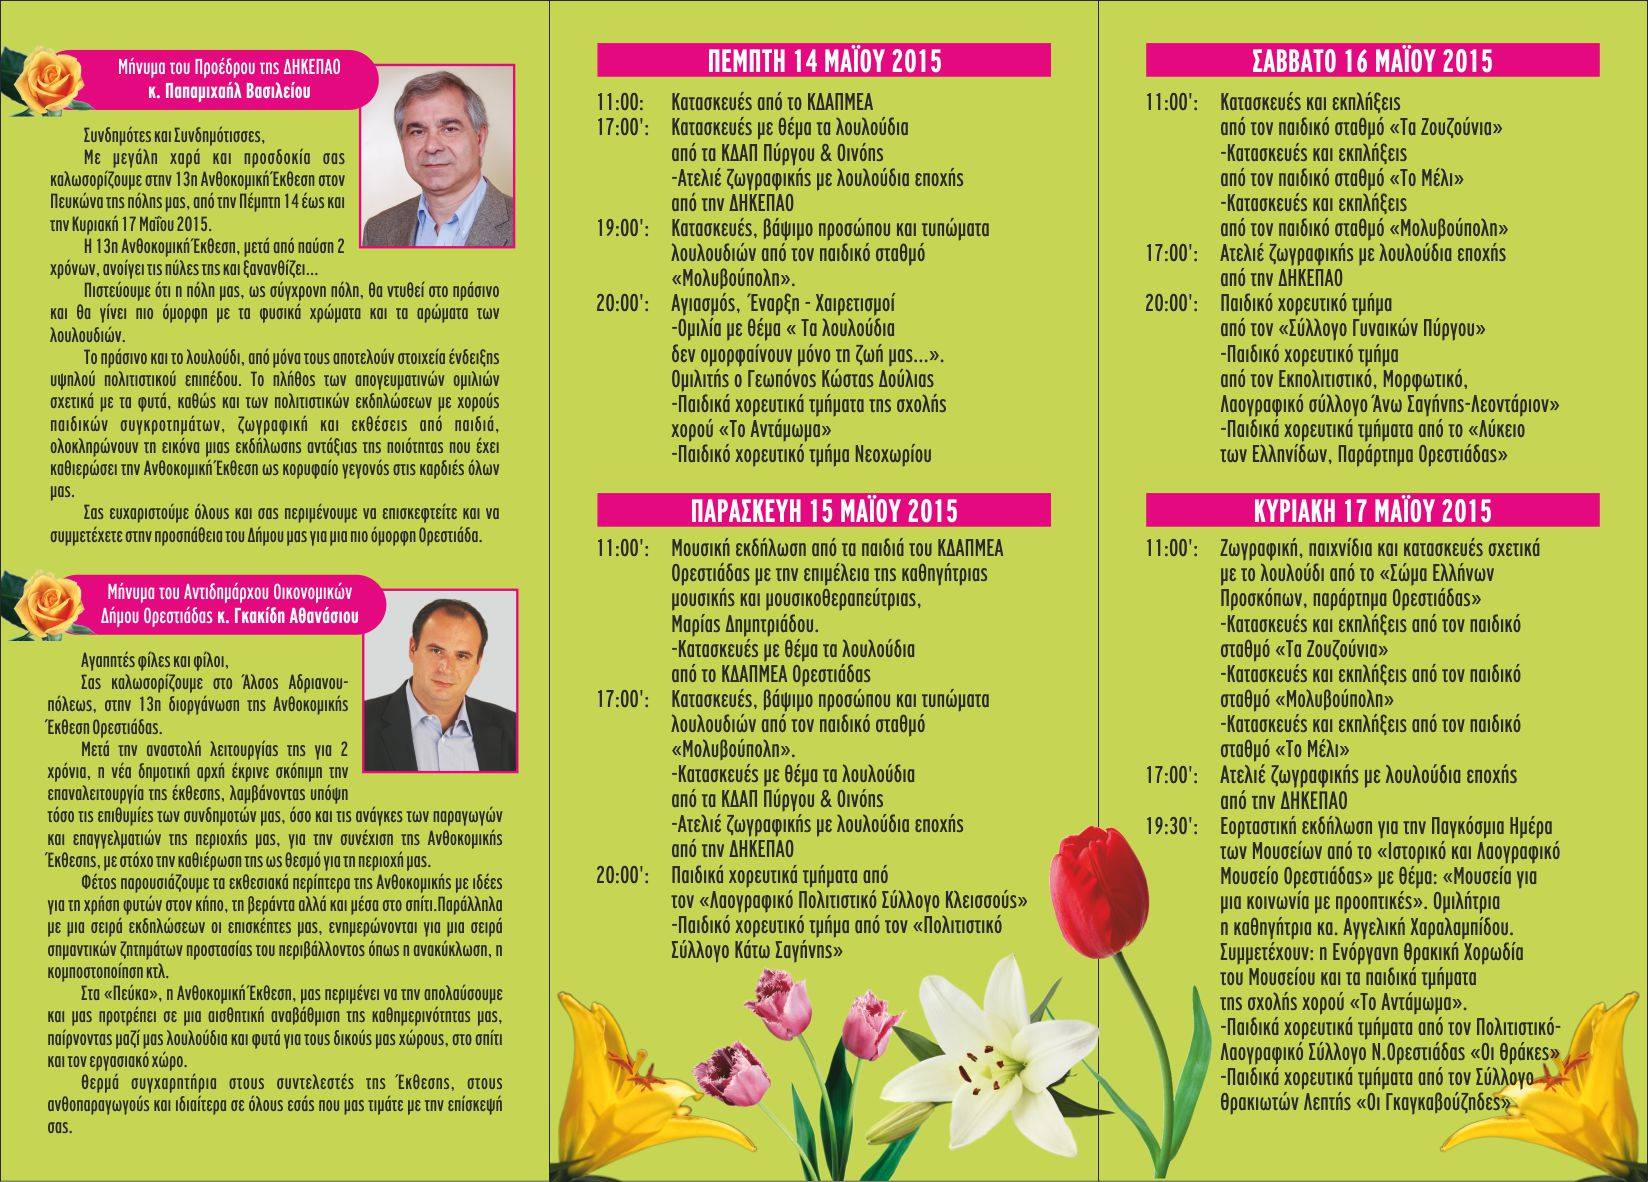 Zeolife.gr participates at the 13th Flower Exhibition in Nea Orestiada, 14 to 17 May, 2015